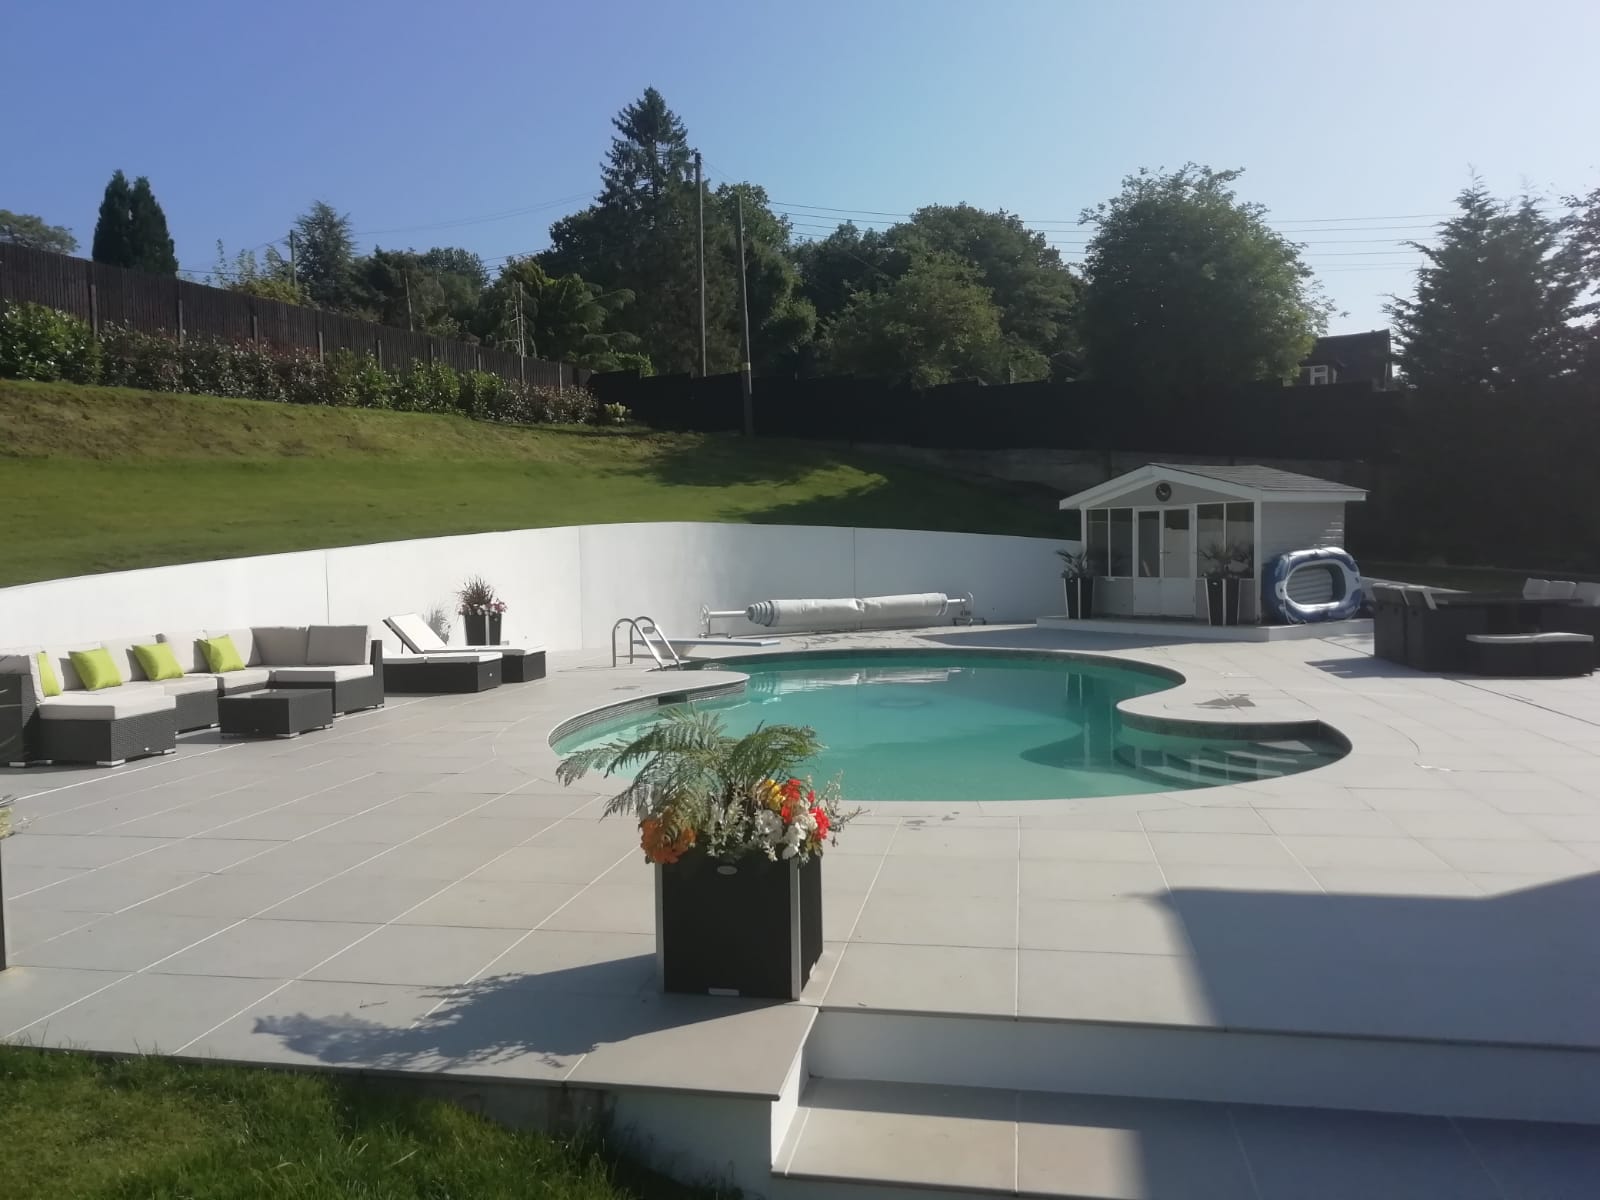 outdoor garden white patio with circlular pool and summer house and deckchairs